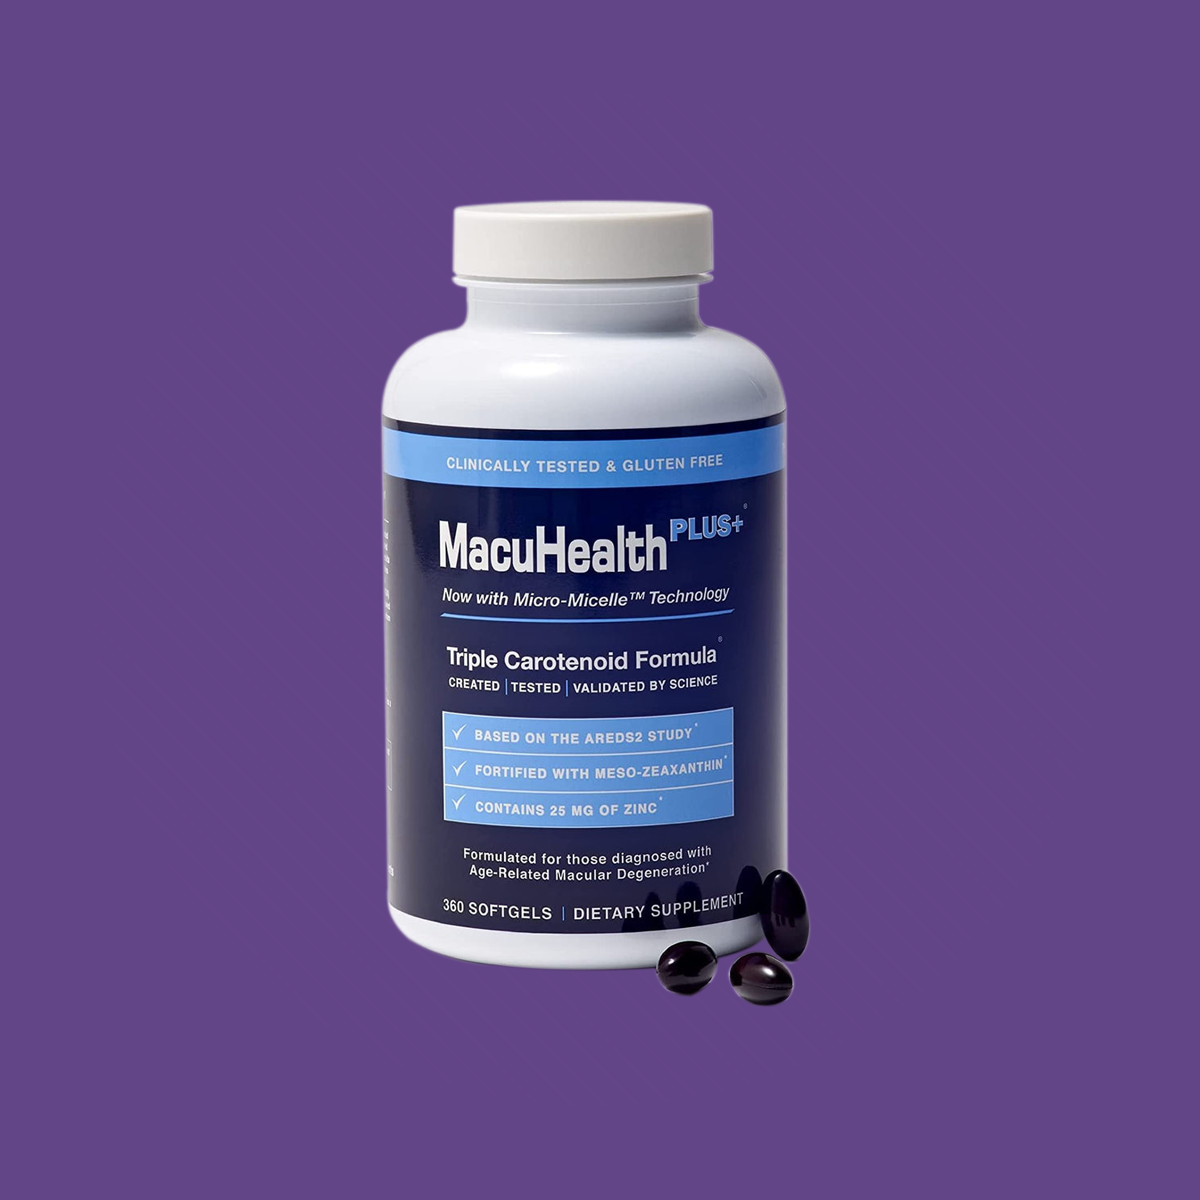 MacuHealth Plus+ Eye Supplement for Adults - Meso-Zeaxanthin, Lutein & Zeaxanthin, (90 Days Supply) Free 2-Day Shipping